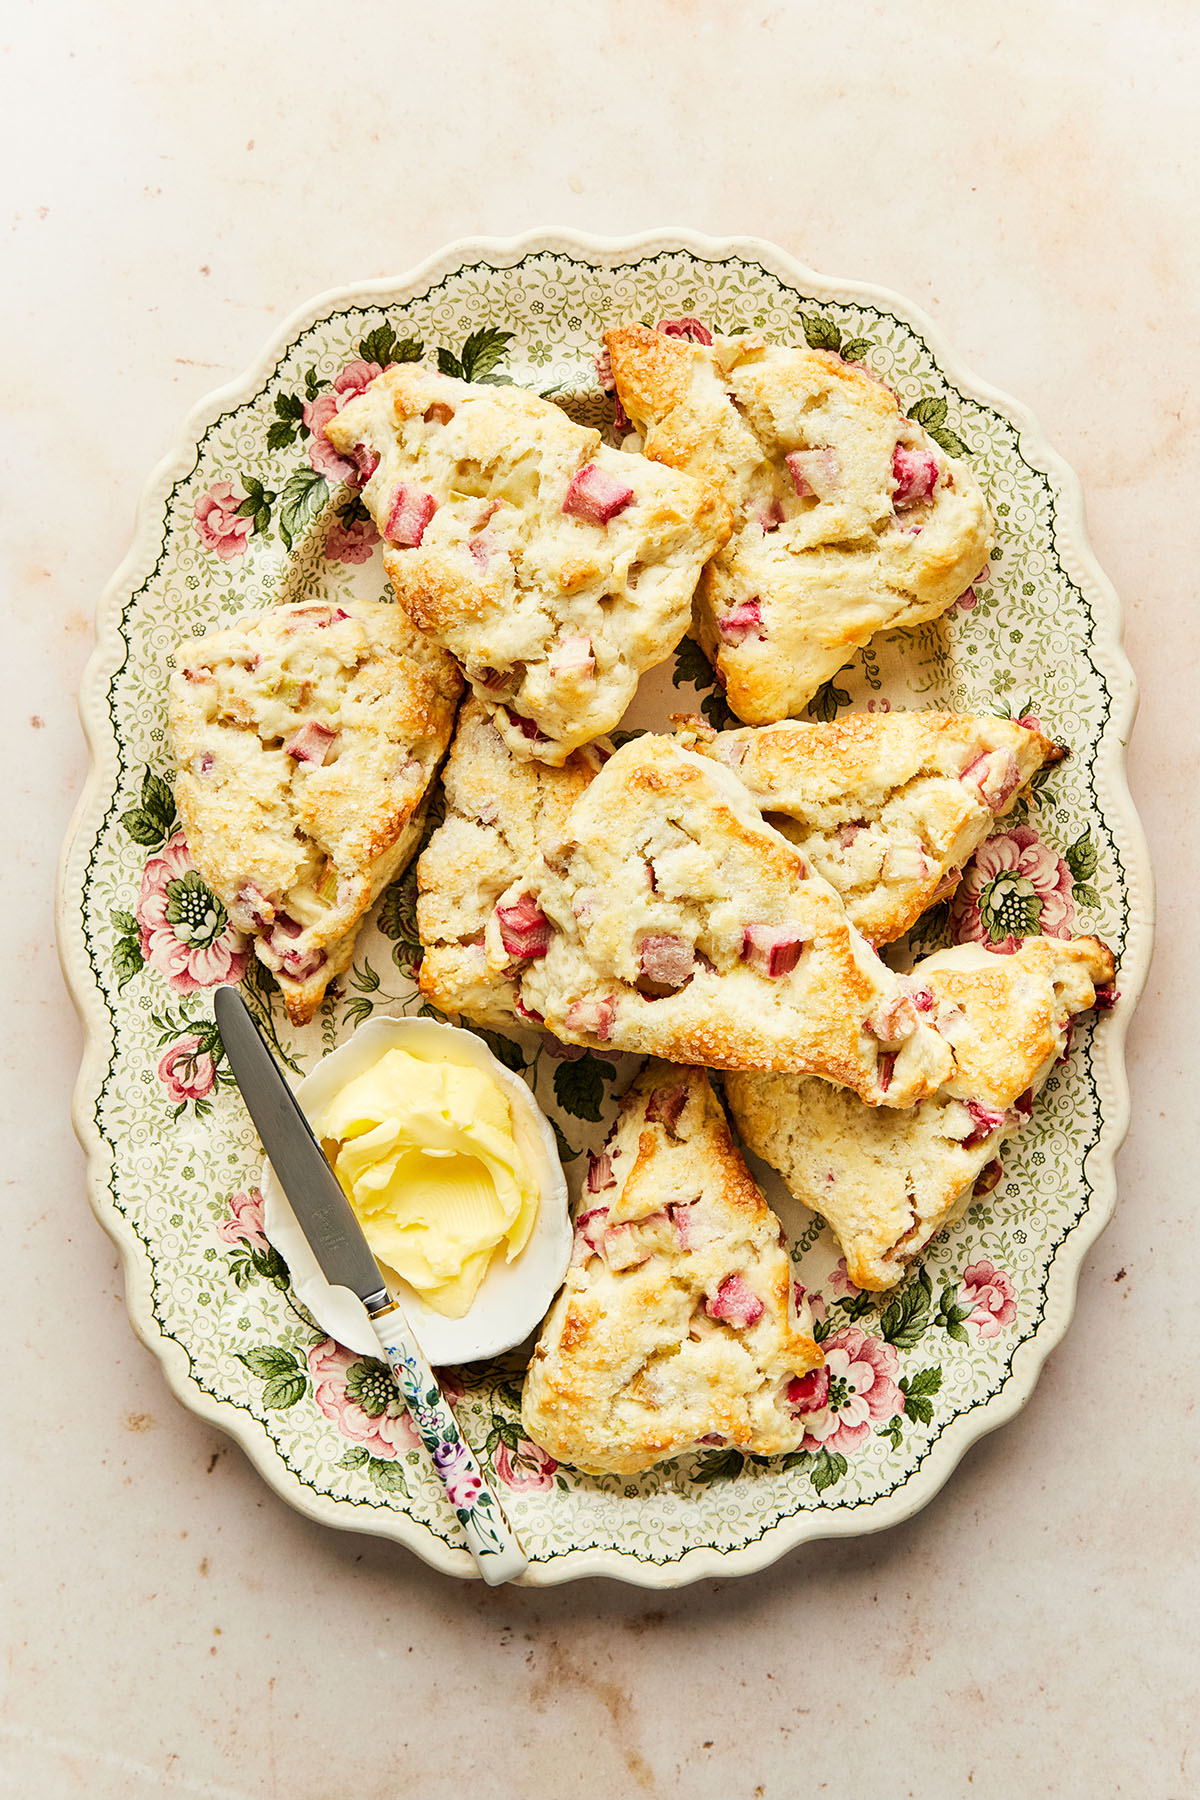 A pink and green flowered platter of rhubarb scones with a small dish of butter and a knife.